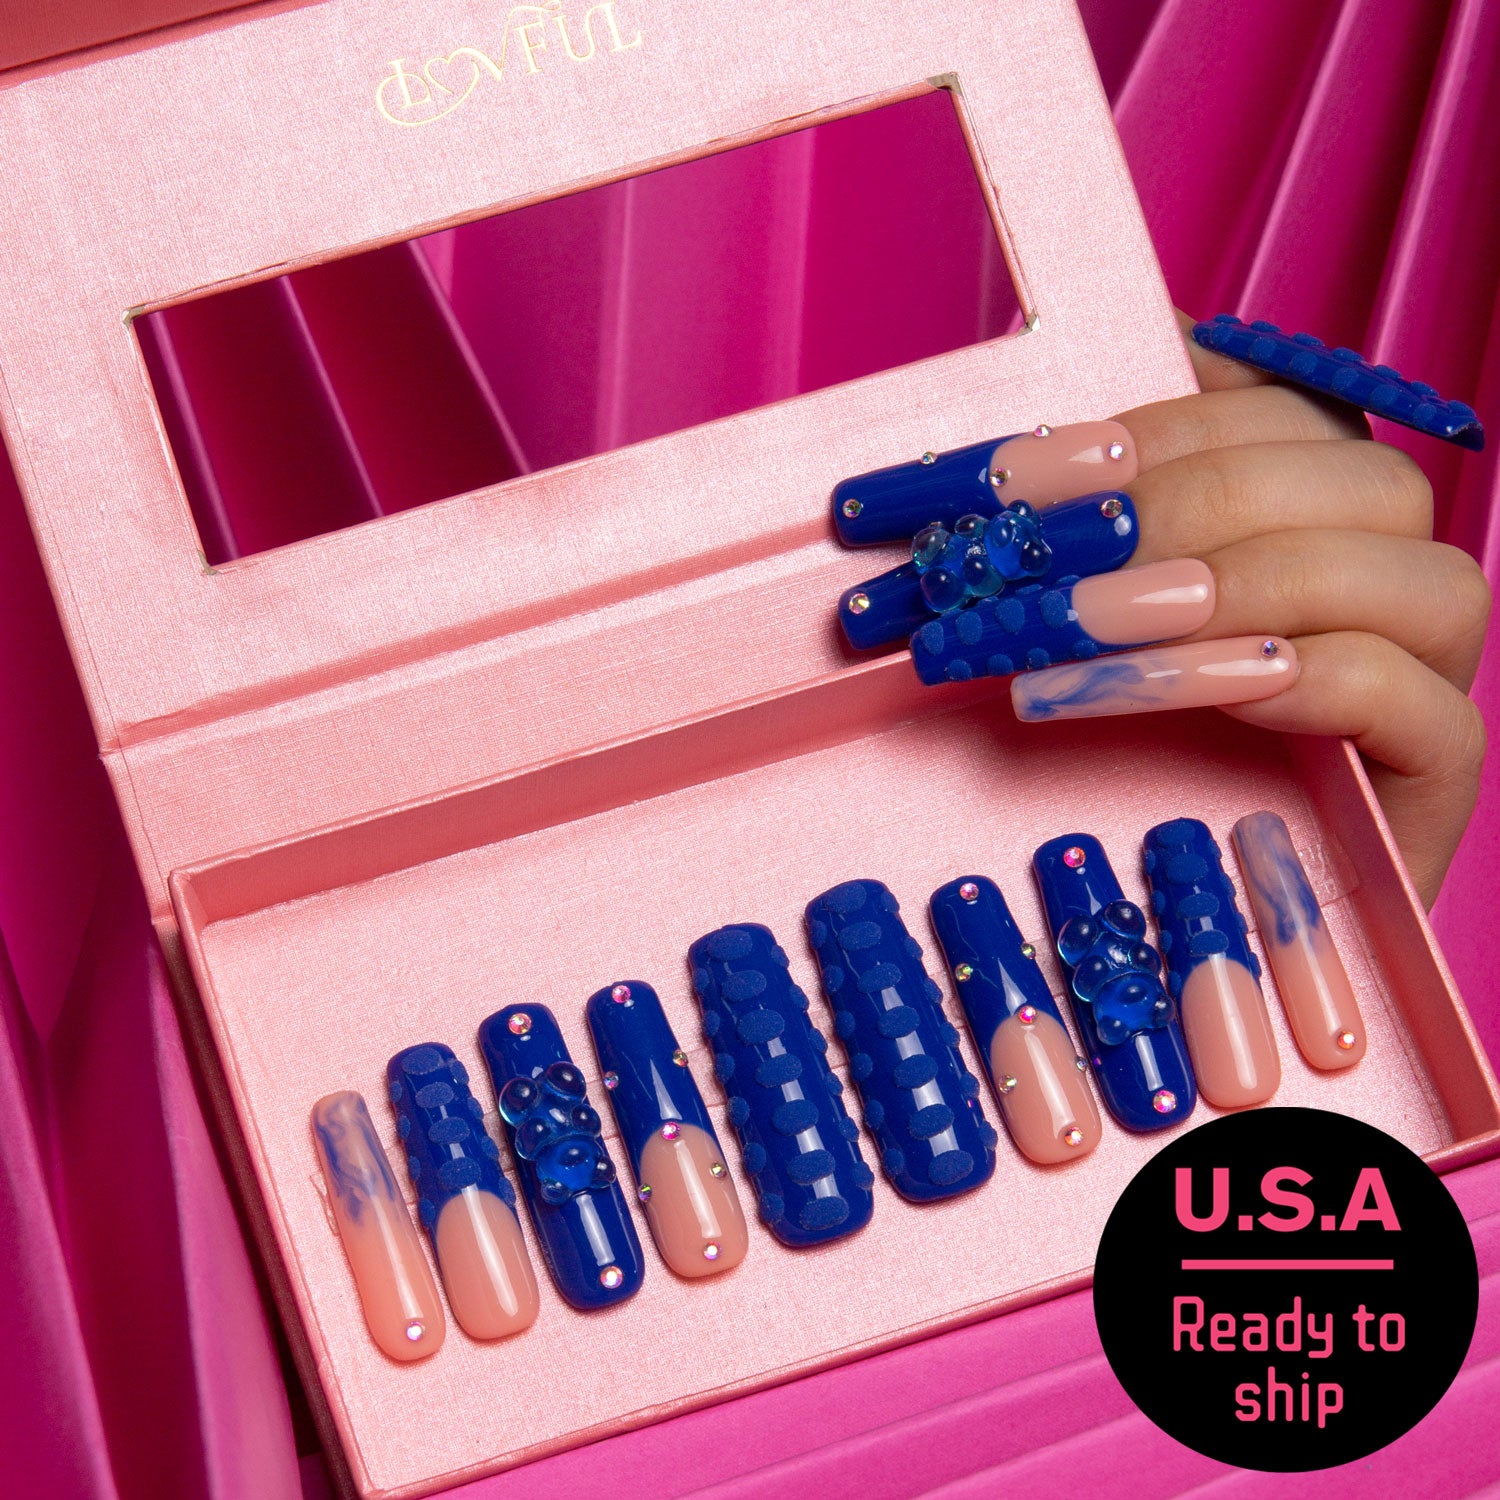 Lovful Little Blue Bear Rhinestone French tip press-on nails set in an open pink box, featuring blue gummy bears, rhinestones, and 3D dots. 'U.S.A Ready to Ship' indicated on the image.